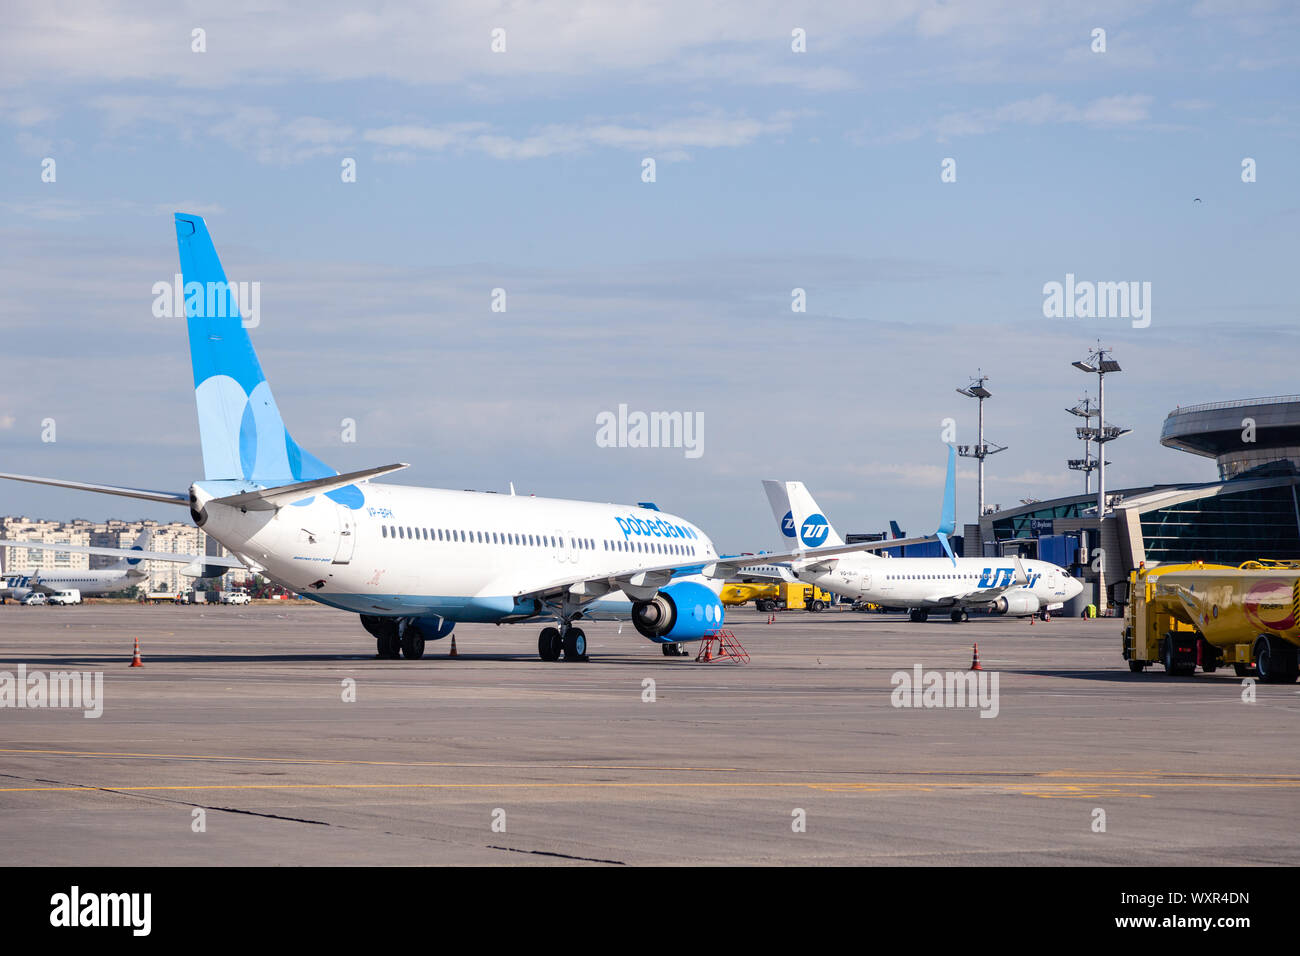 Russia Moscow 2019-06-17 Boeing 737 Pobeda Airlines russian company low cost price arrived to airport, standing on airplane parking, landing strip Stock Photo